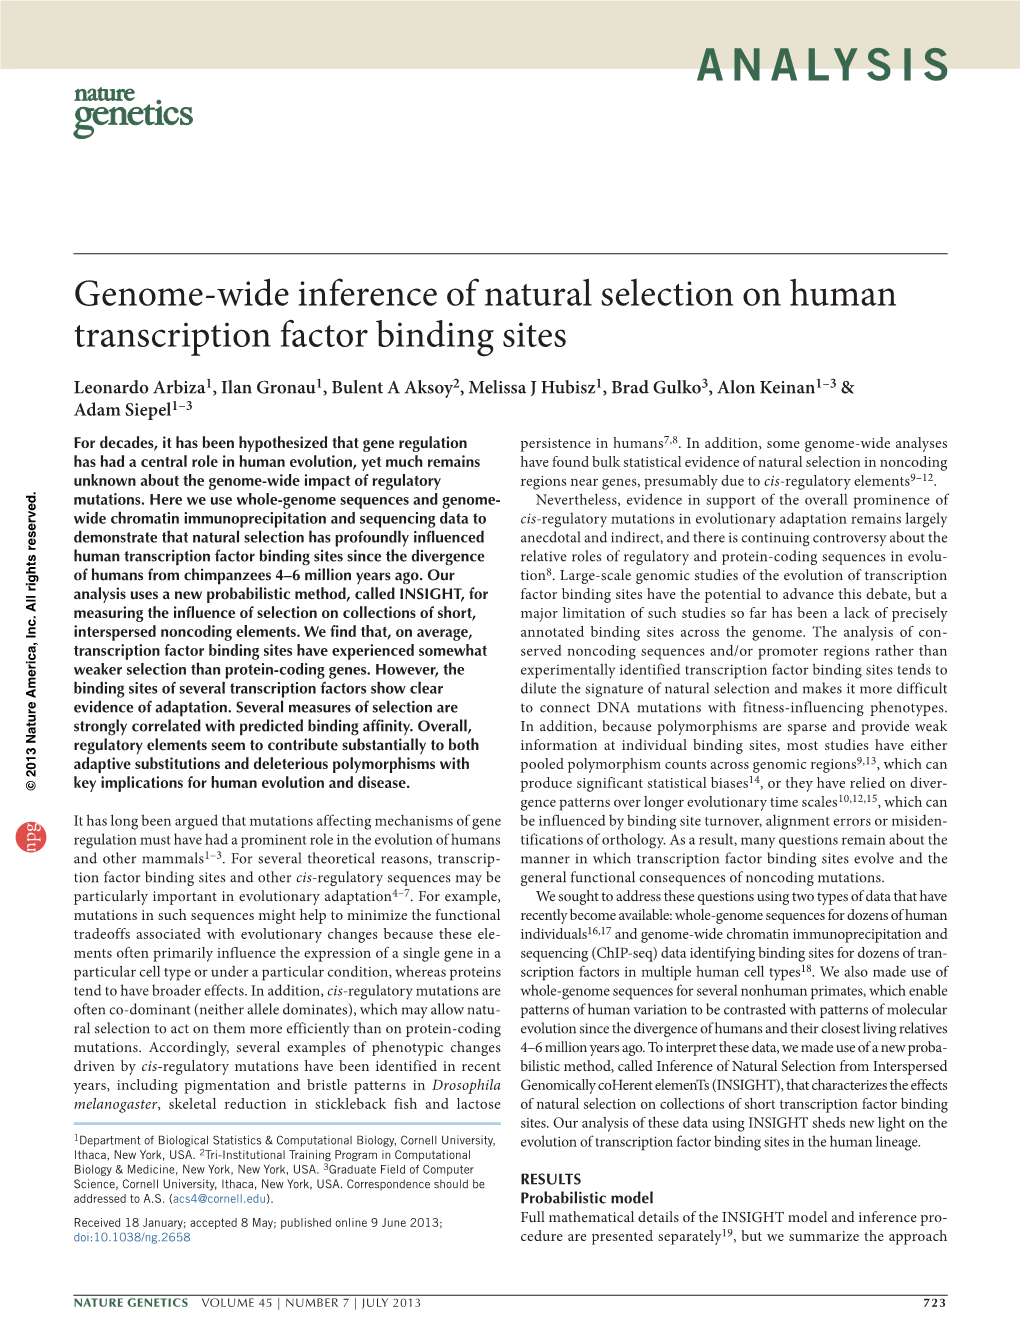 Genome-Wide Inference of Natural Selection on Human Transcription Factor Binding Sites